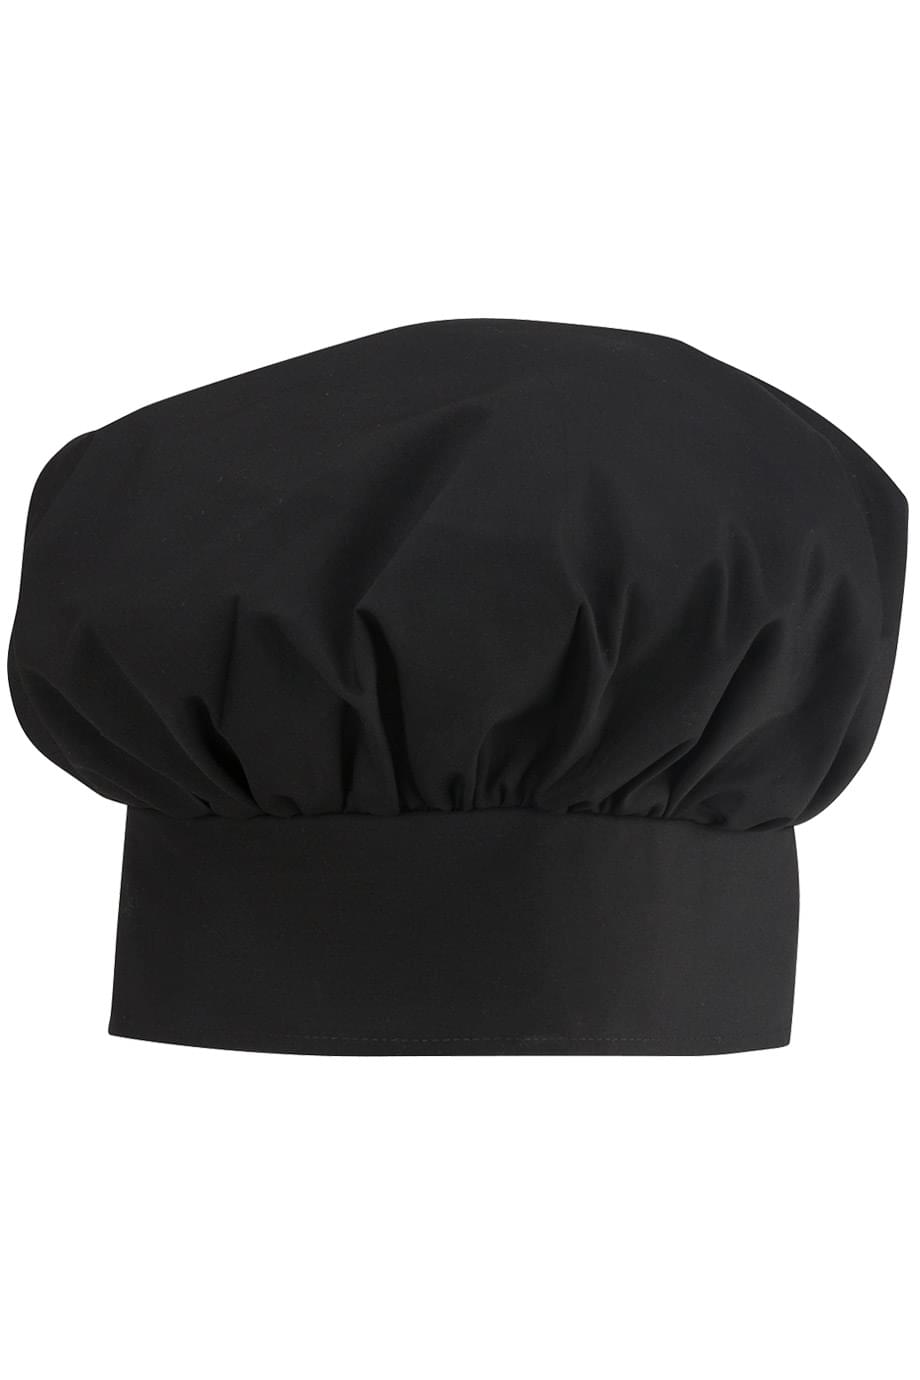 Traditional Unisex Chef Hat Classic Kitchen Chef Hat with Closure One Size 